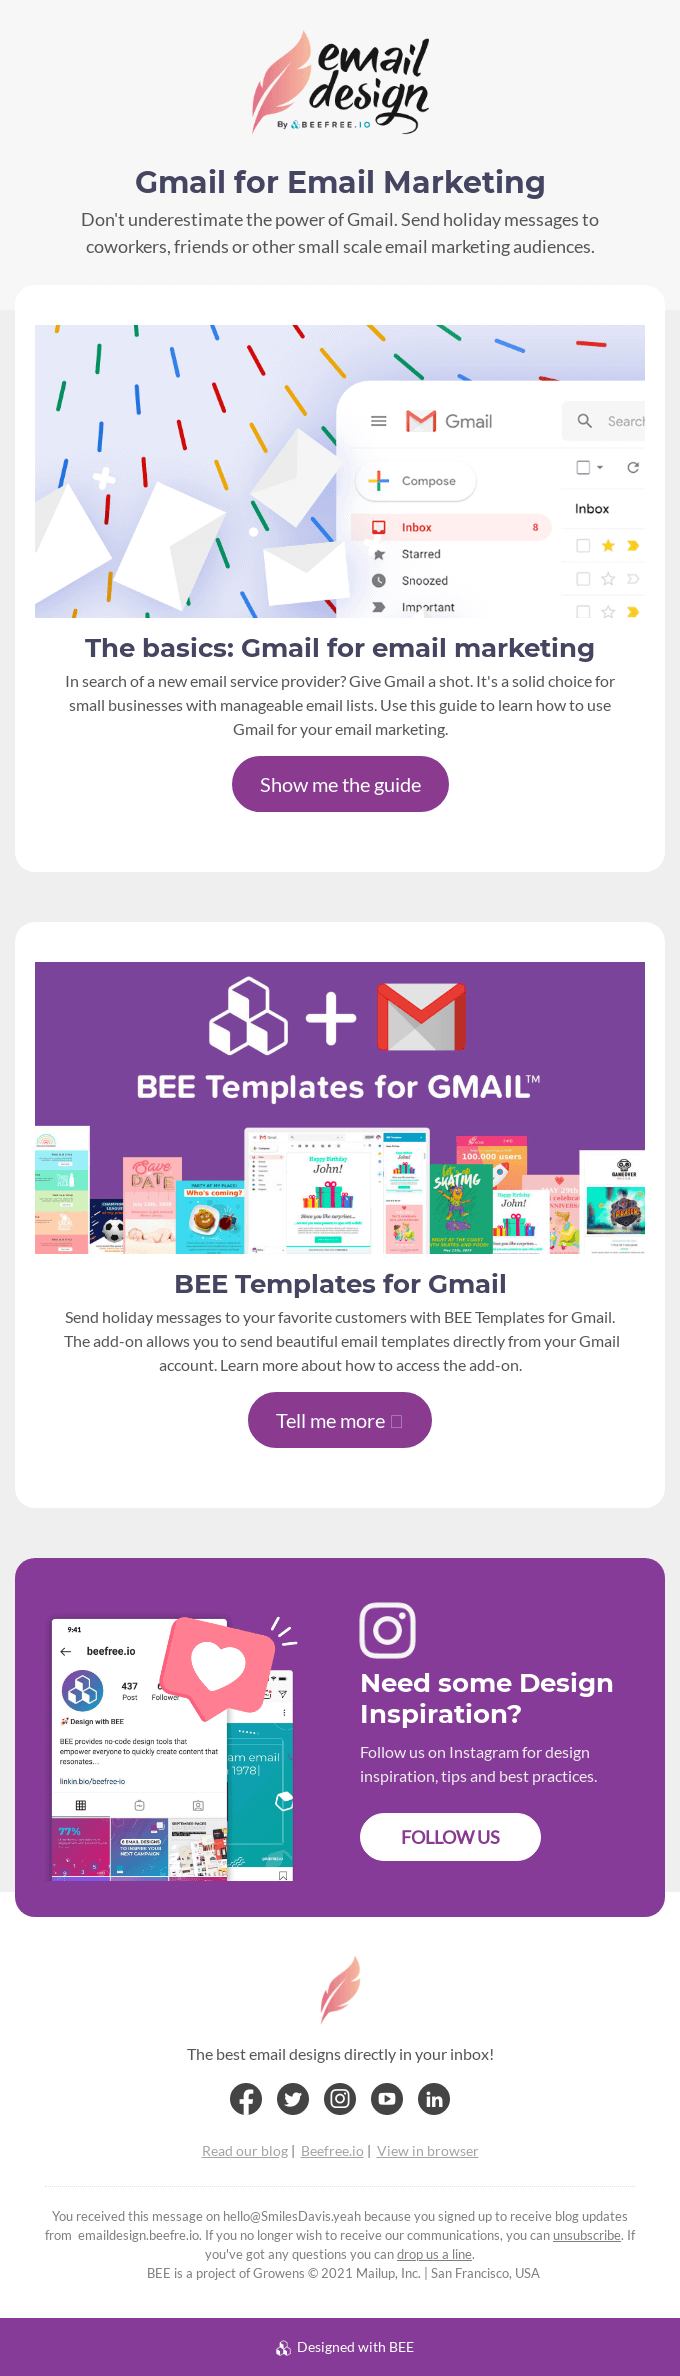 Email Design Blog | BEE Templates for Gmail